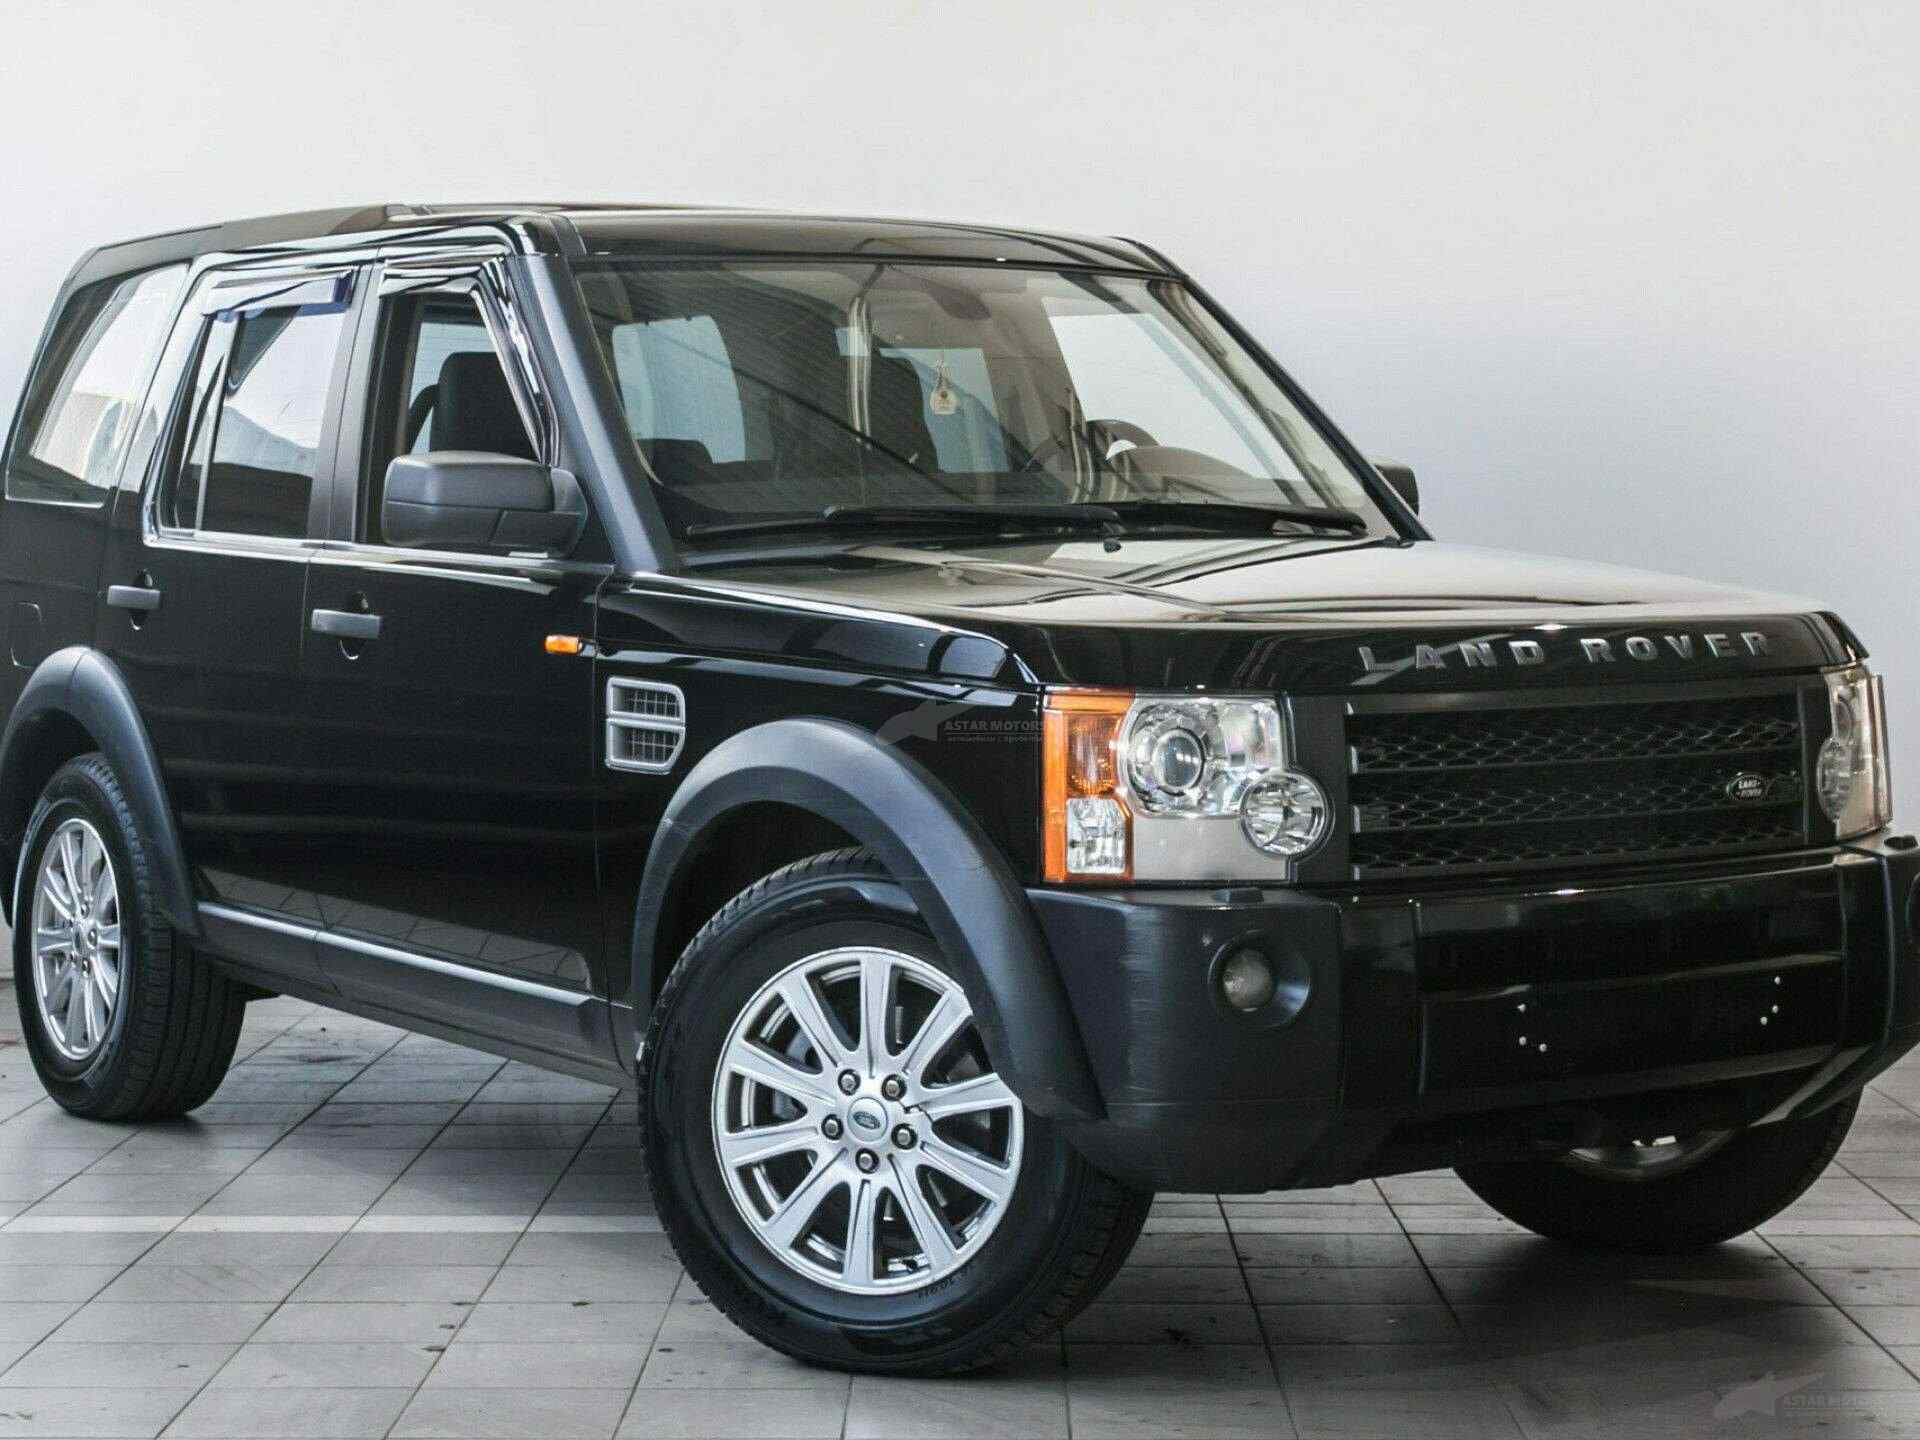 Land Rover Discovery 2008. Land Rover Discovery 2007. Рендж Ровер Дискавери 2007. Land Rover Discovery 2. Дискавери 2007